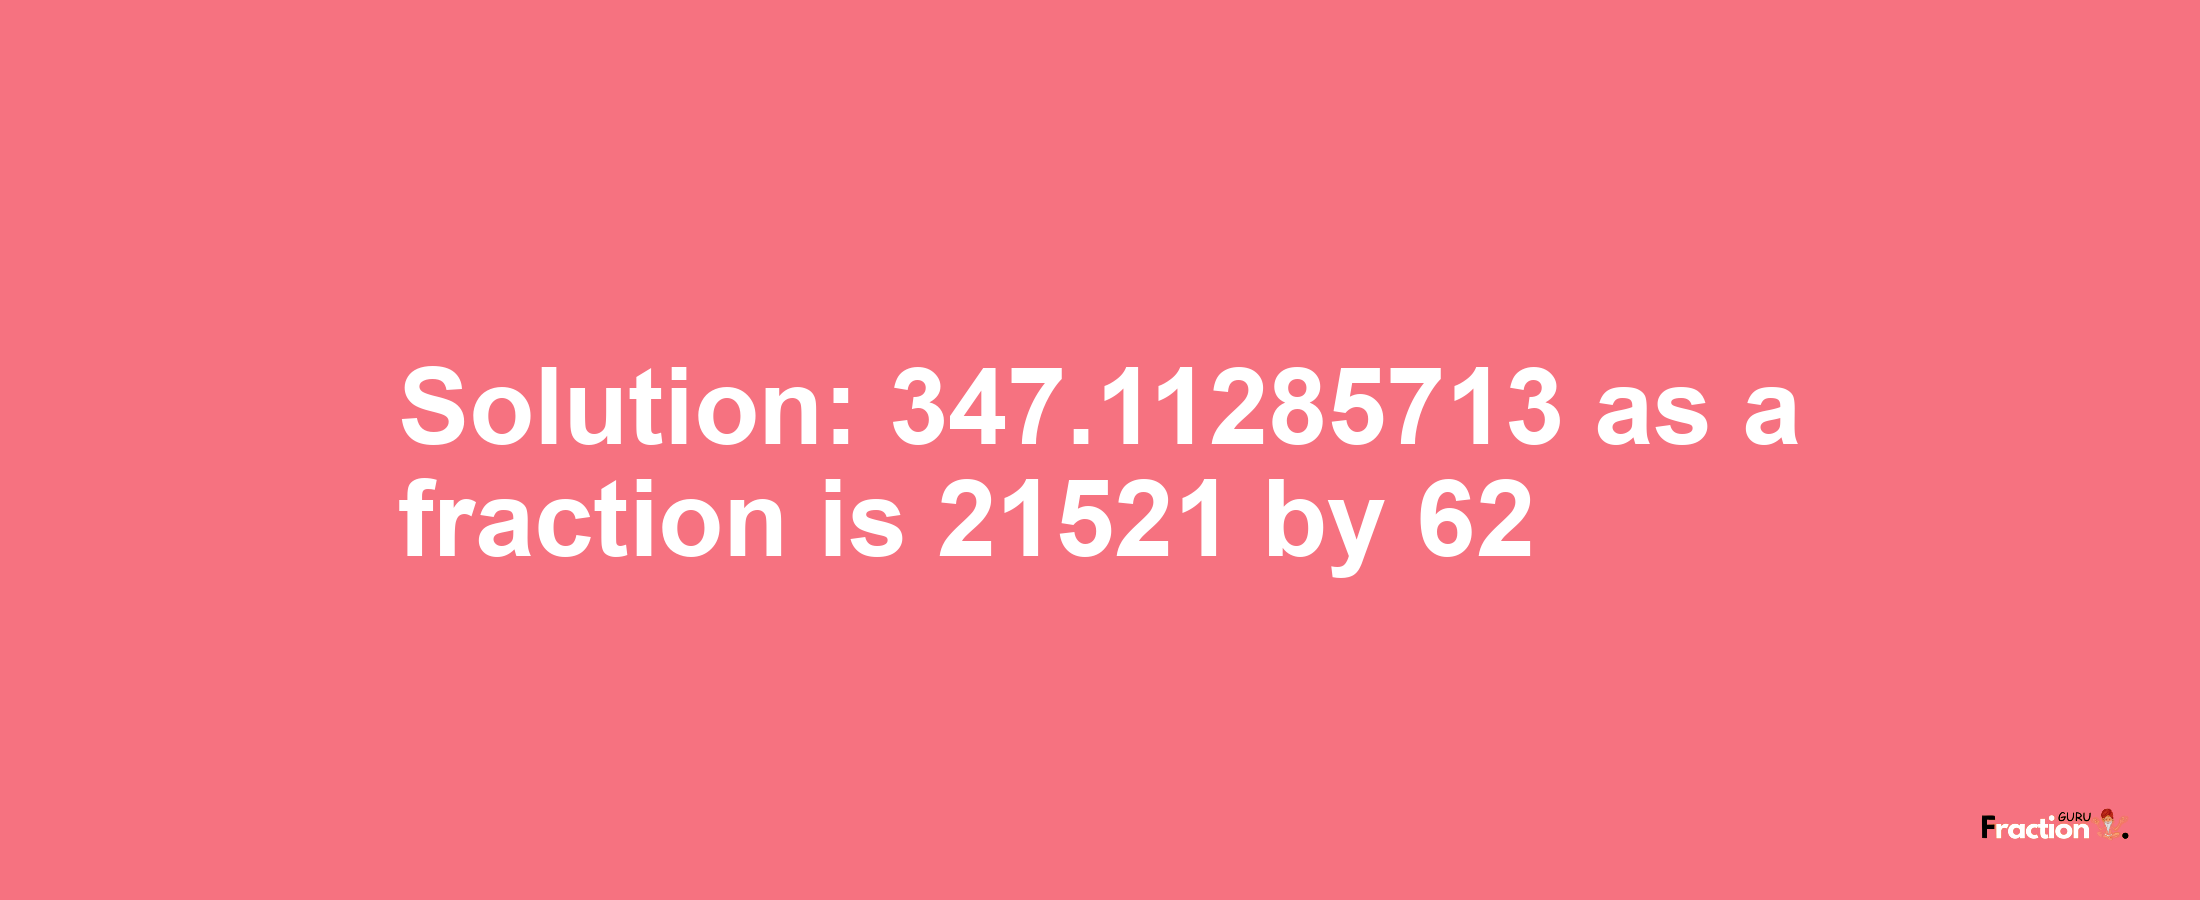 Solution:347.11285713 as a fraction is 21521/62